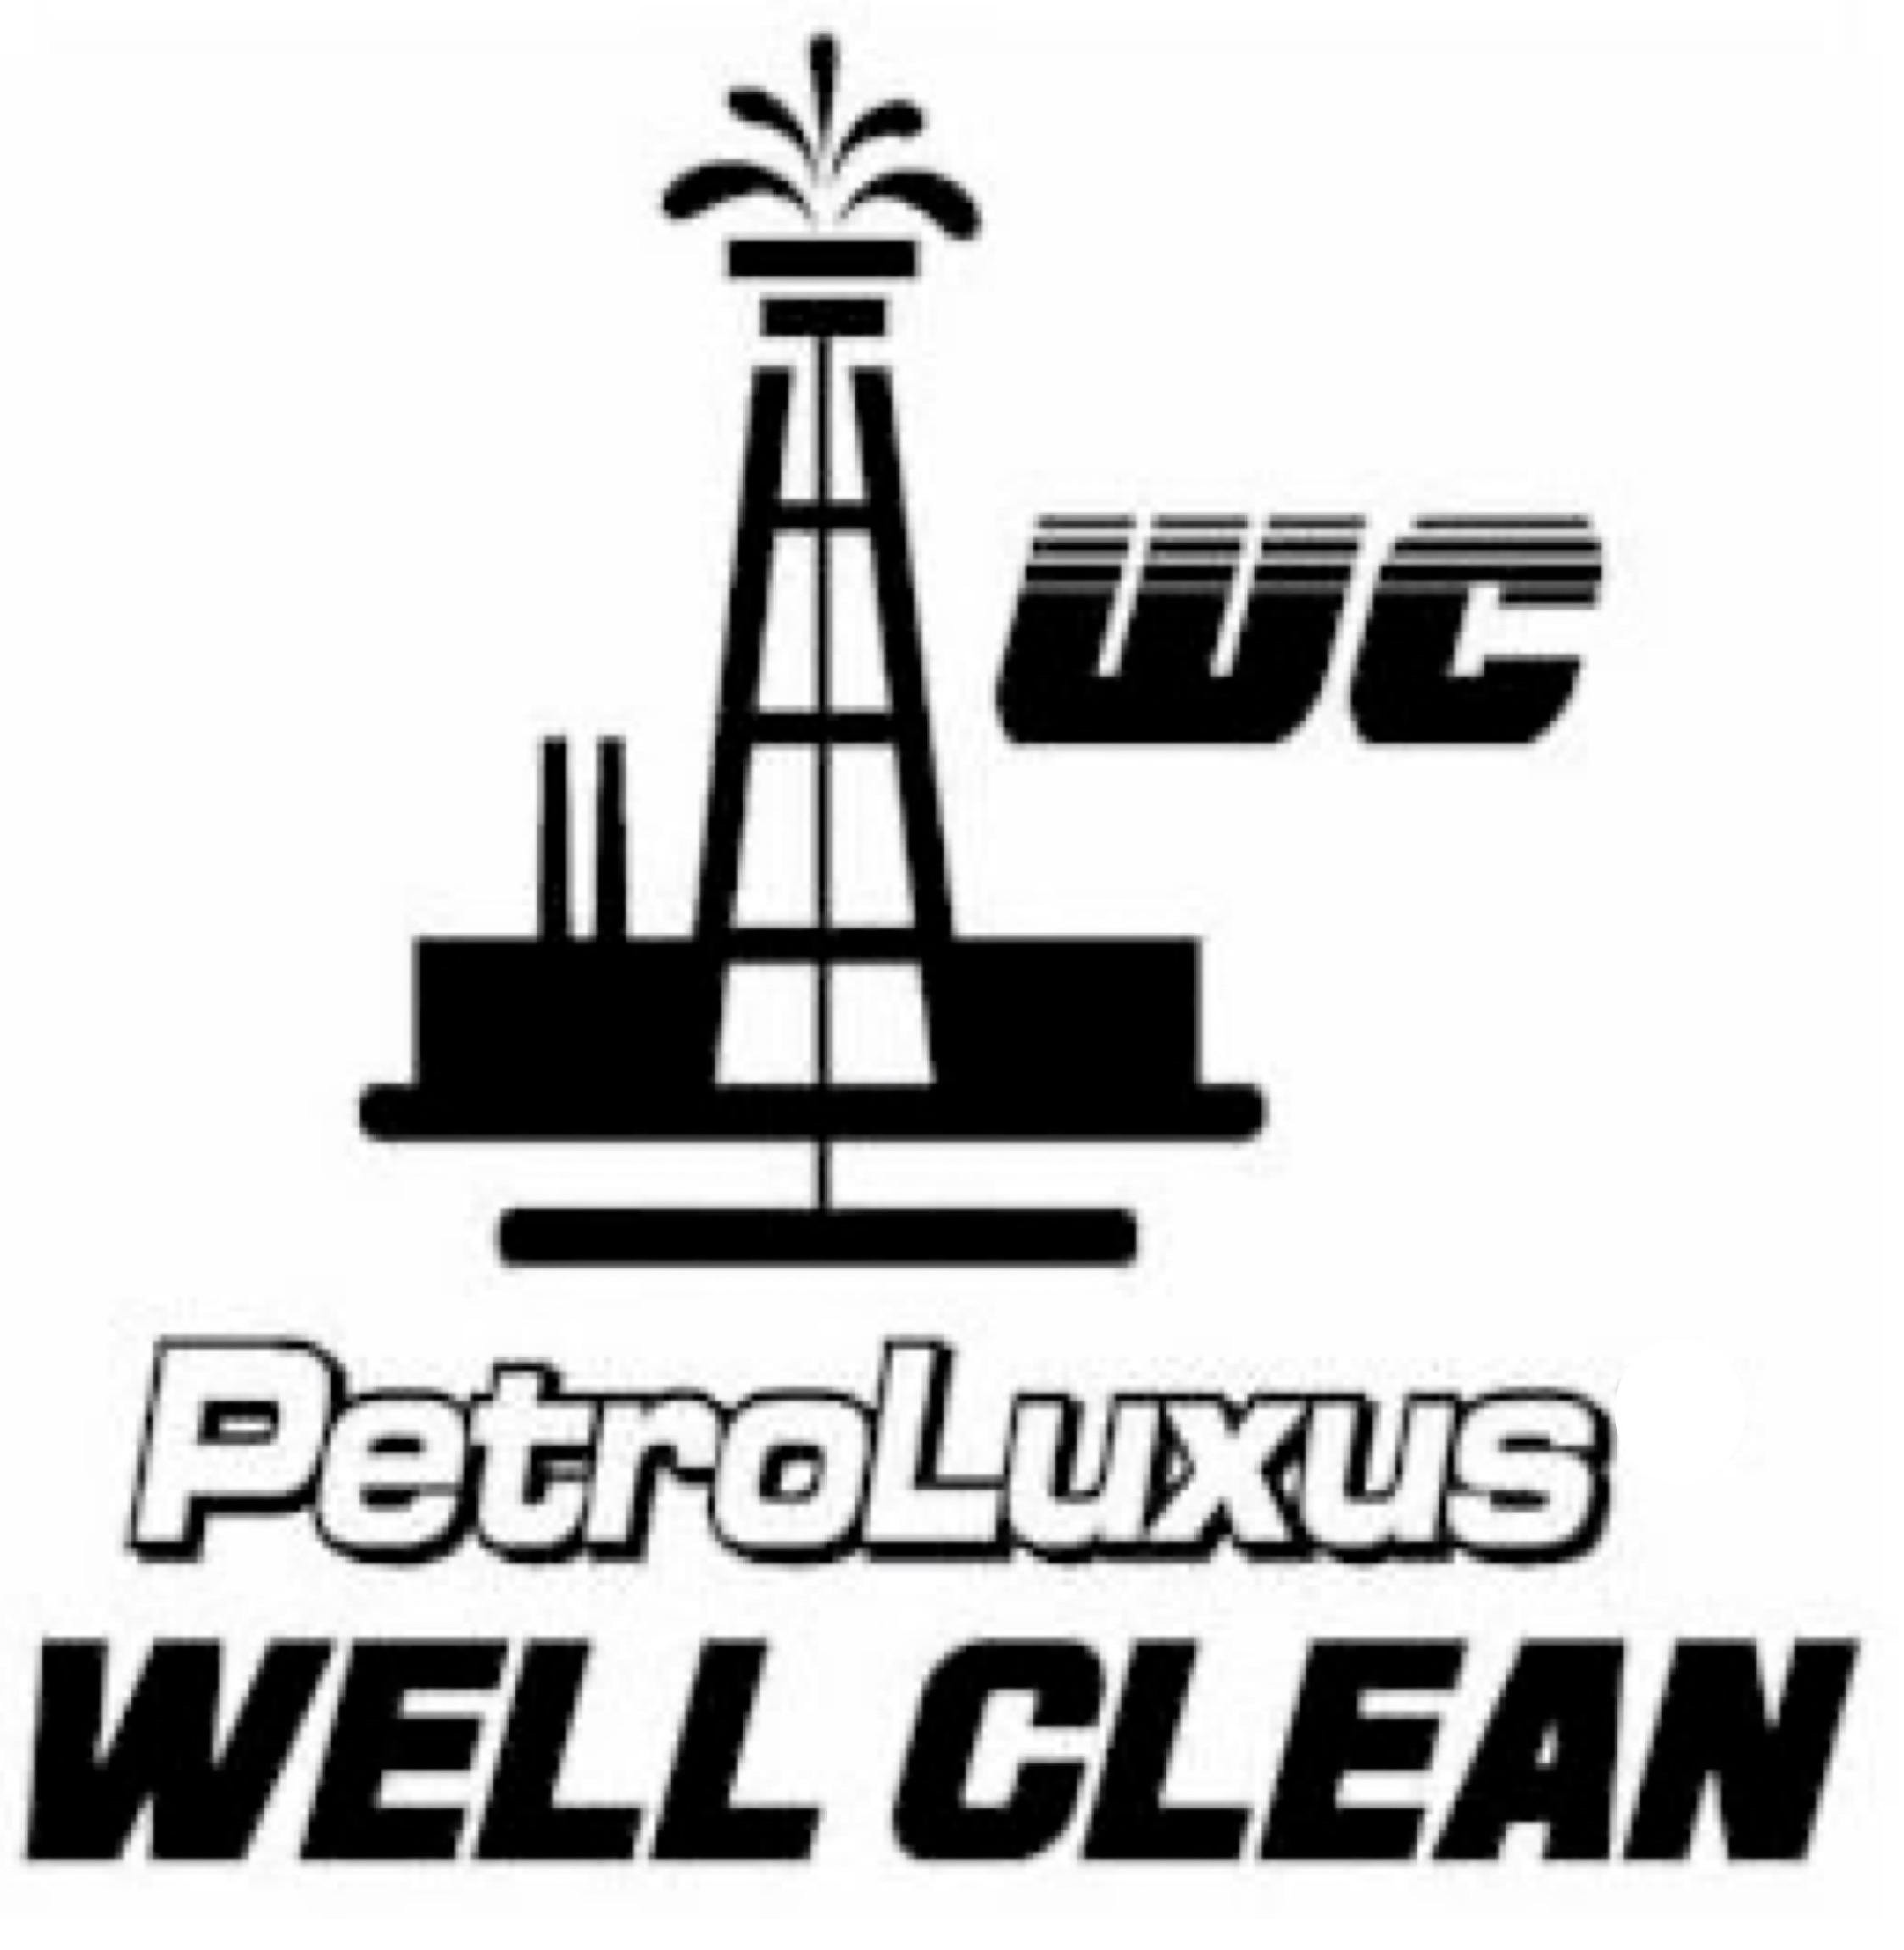  PETROLUXUS WELL CLEAN